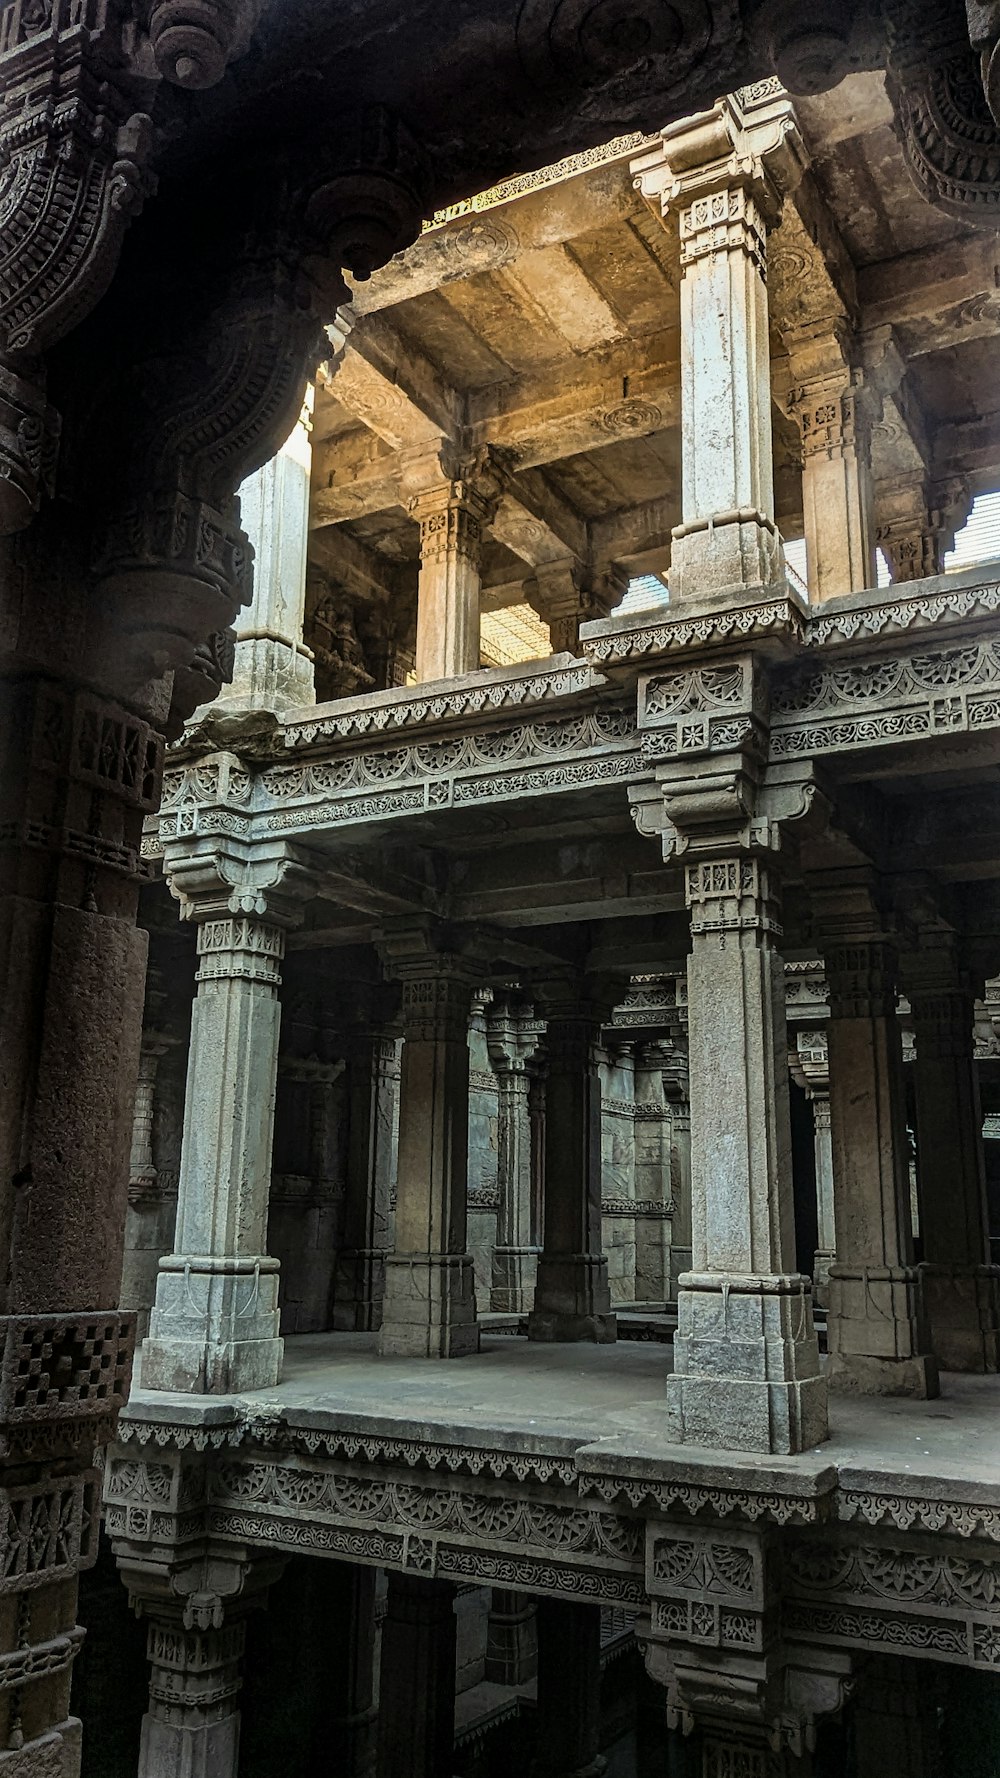 a large building with pillars and pillars inside of it